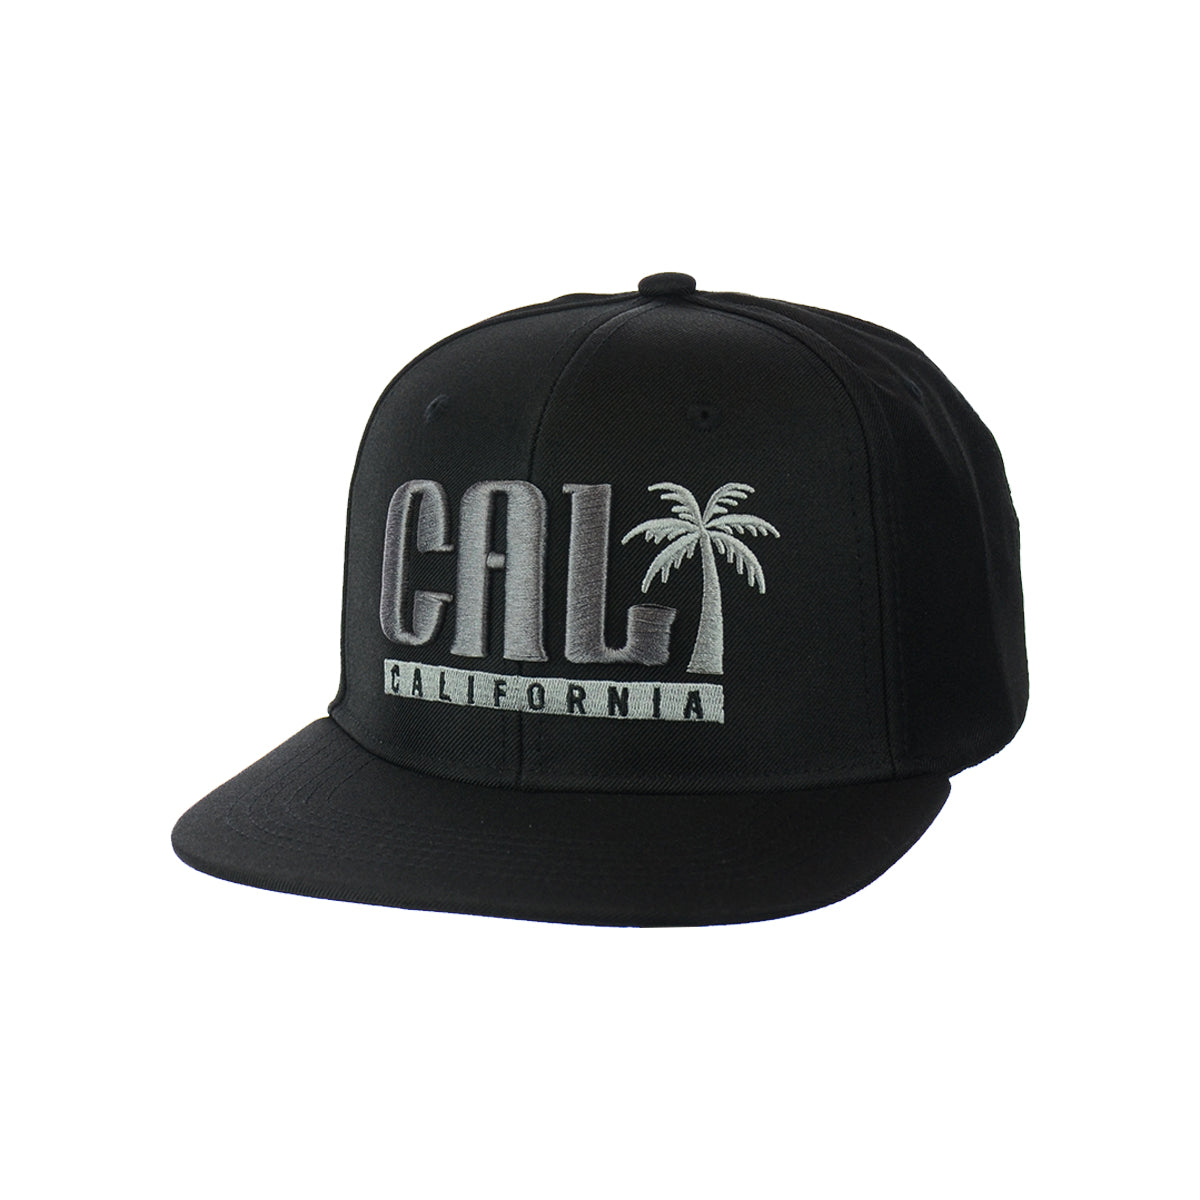 California Embroidered Snapback Hat